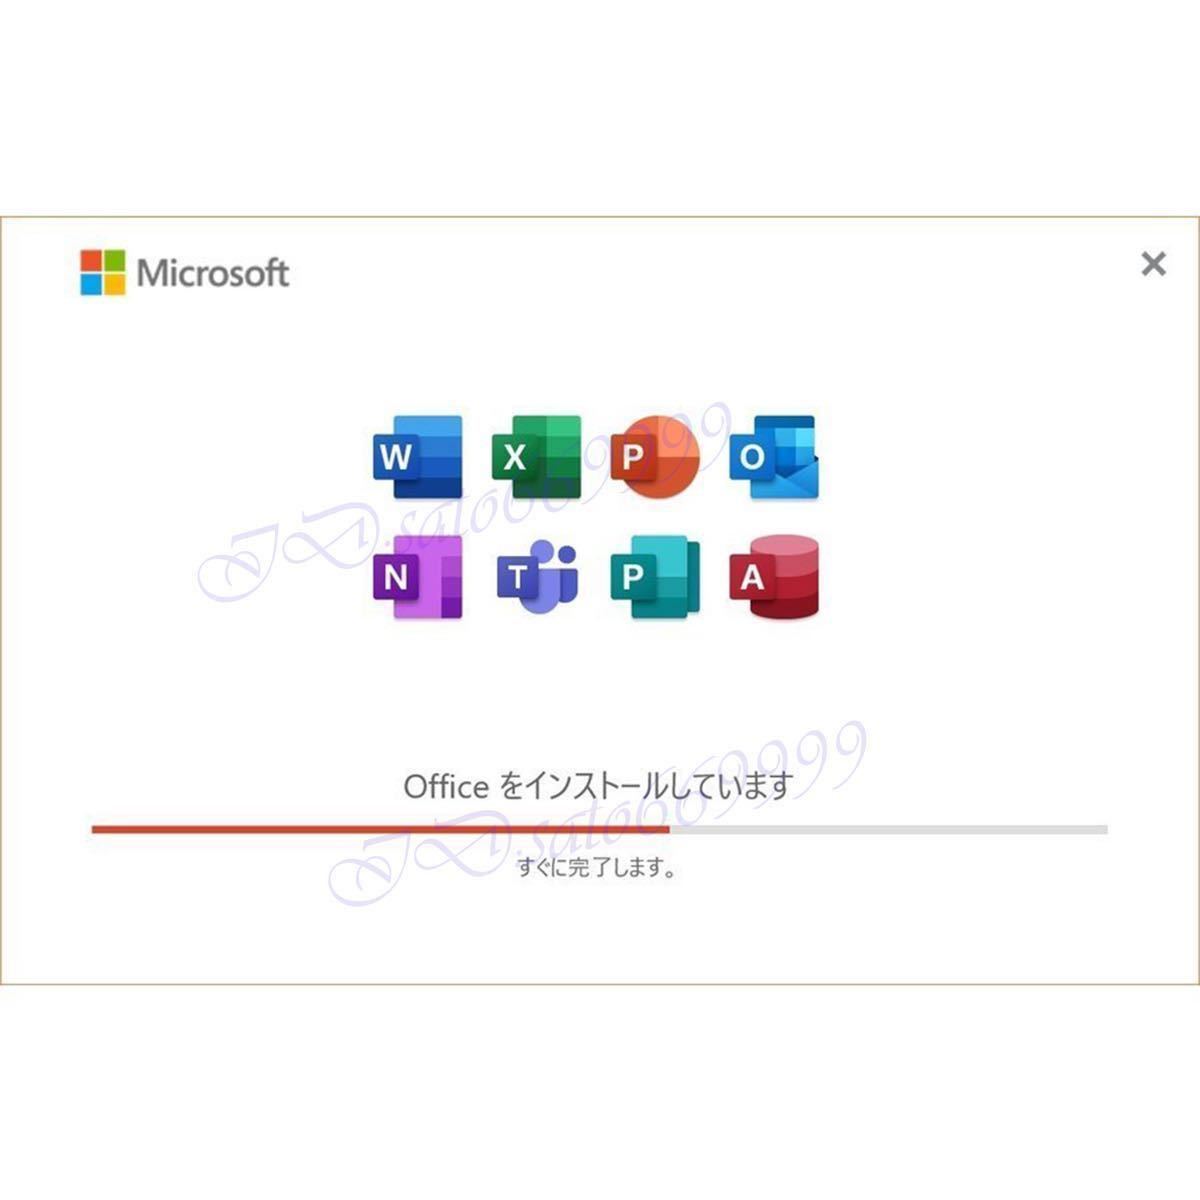 Microsoft Office2021 Professional Plusプロダクトキー日本語 正規認証保証Word Excel PowerPoint Access 安心サポート付き 水の画像3